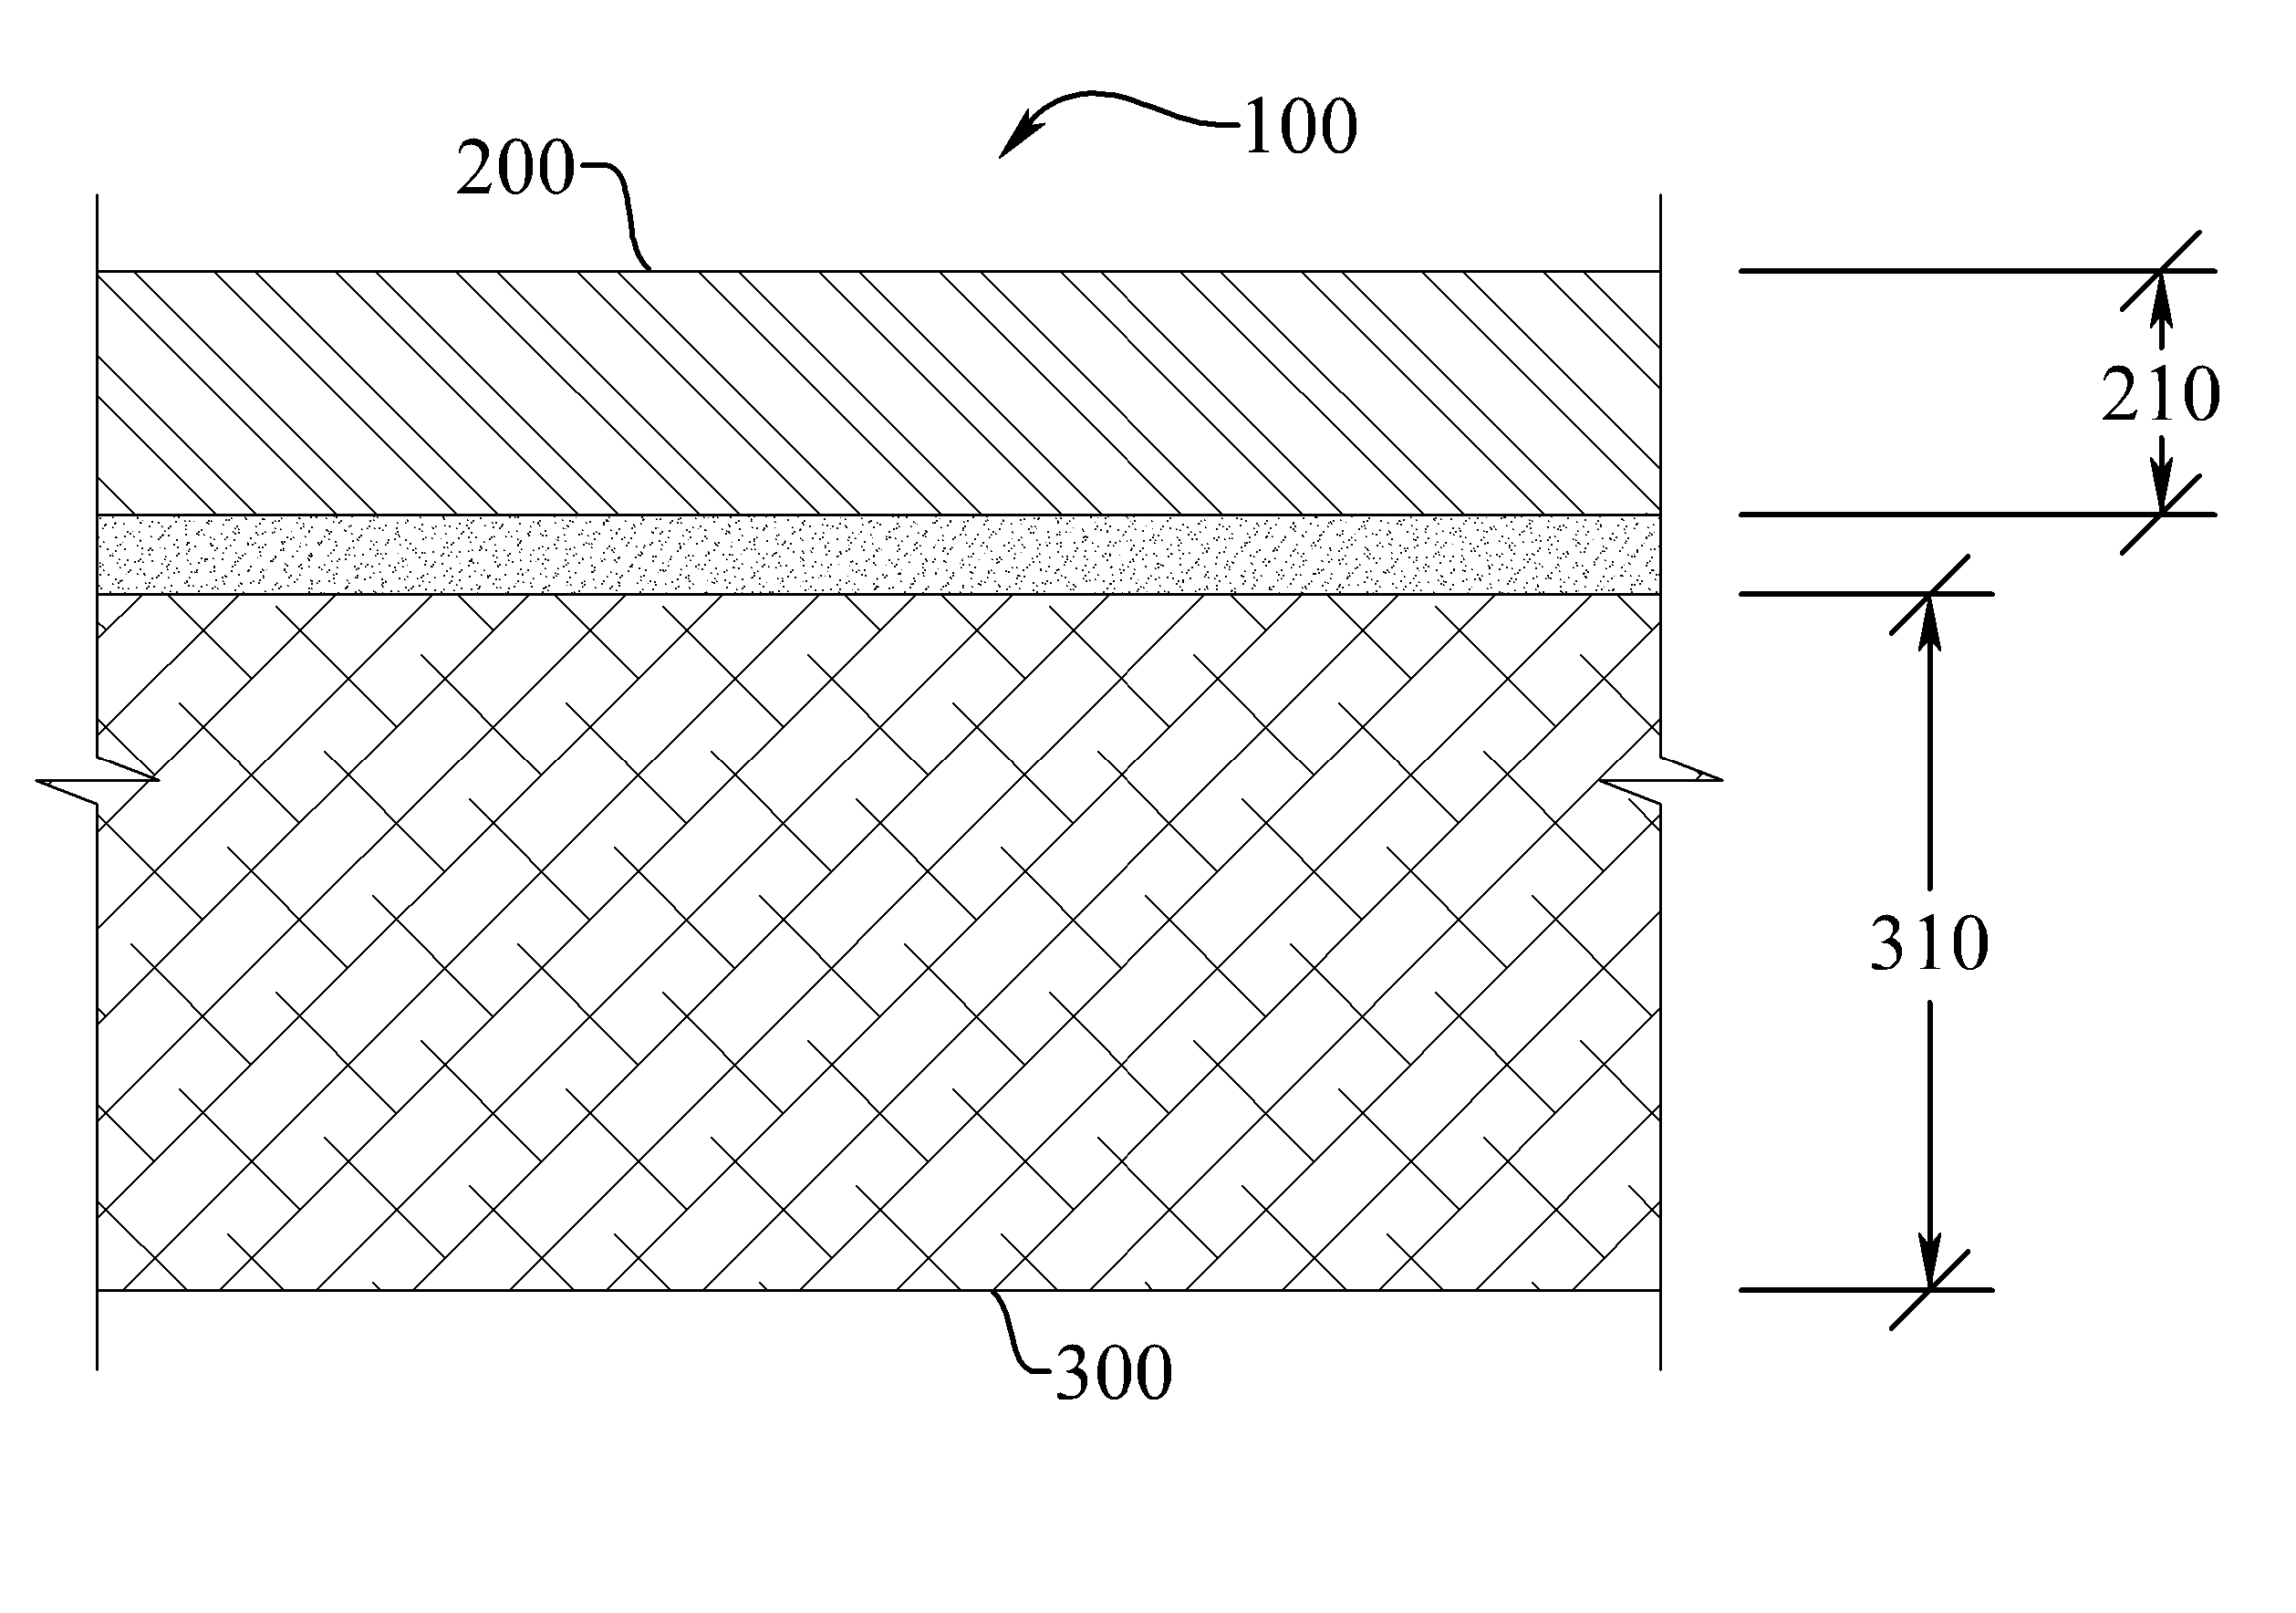 Thermally and acoustically insulative vehicle flooring system